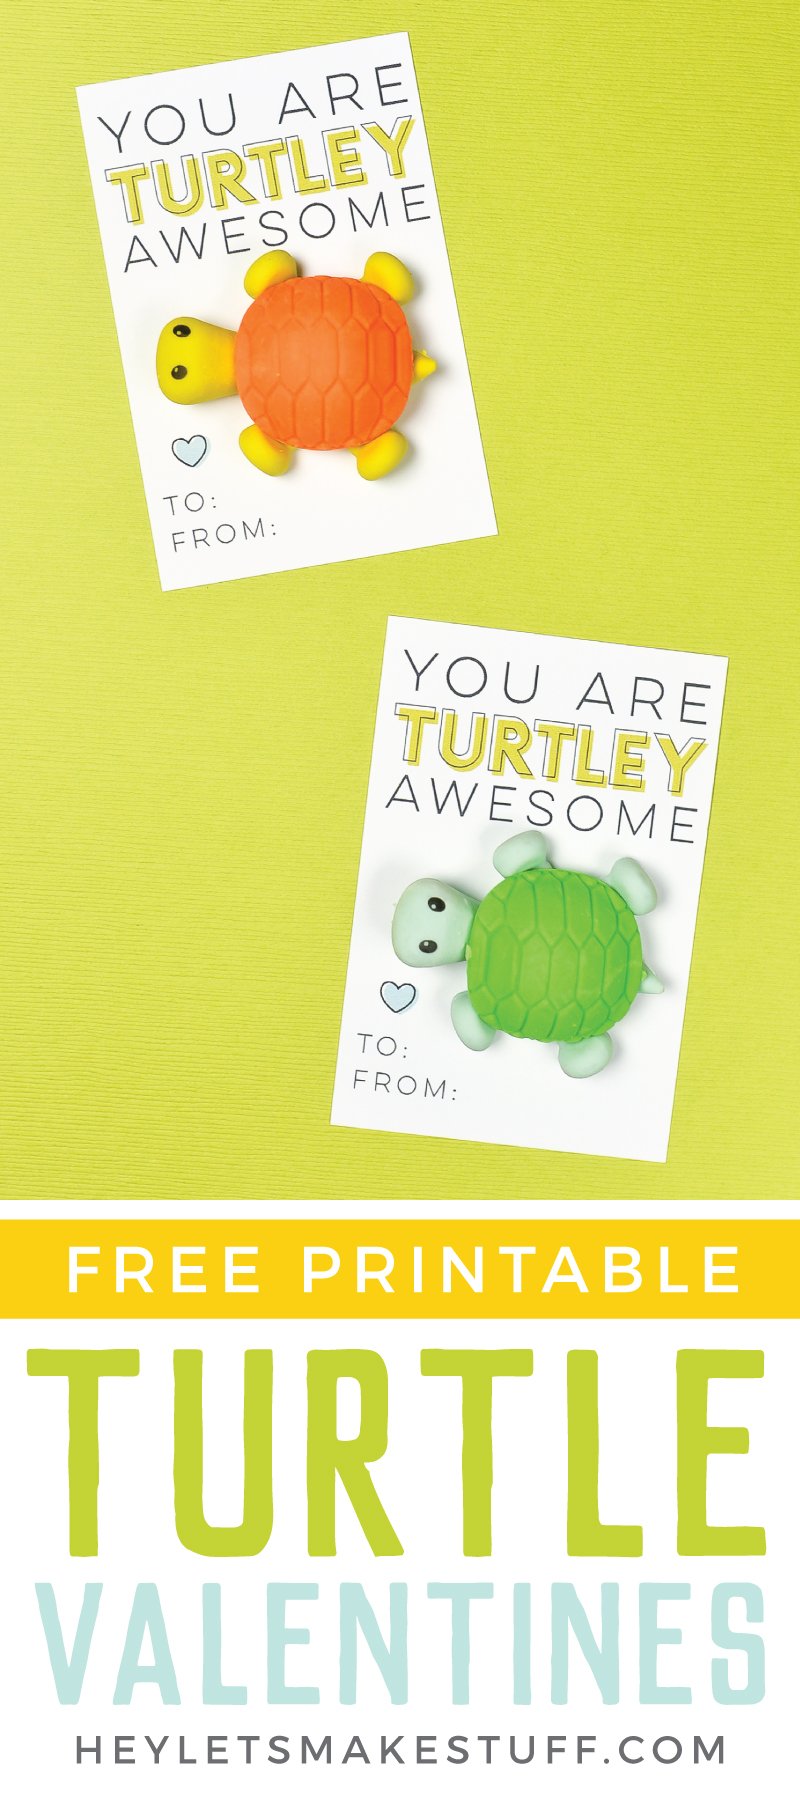 Image of two Valentine cards, one with a yellow and orange toy turtle attached to it and the other one with a green and blue toy turtle and both say, \"You Are Turtley Awesome\" and advertising for free printable turtle valentines from HEYLETSMAKESTUFF.COM